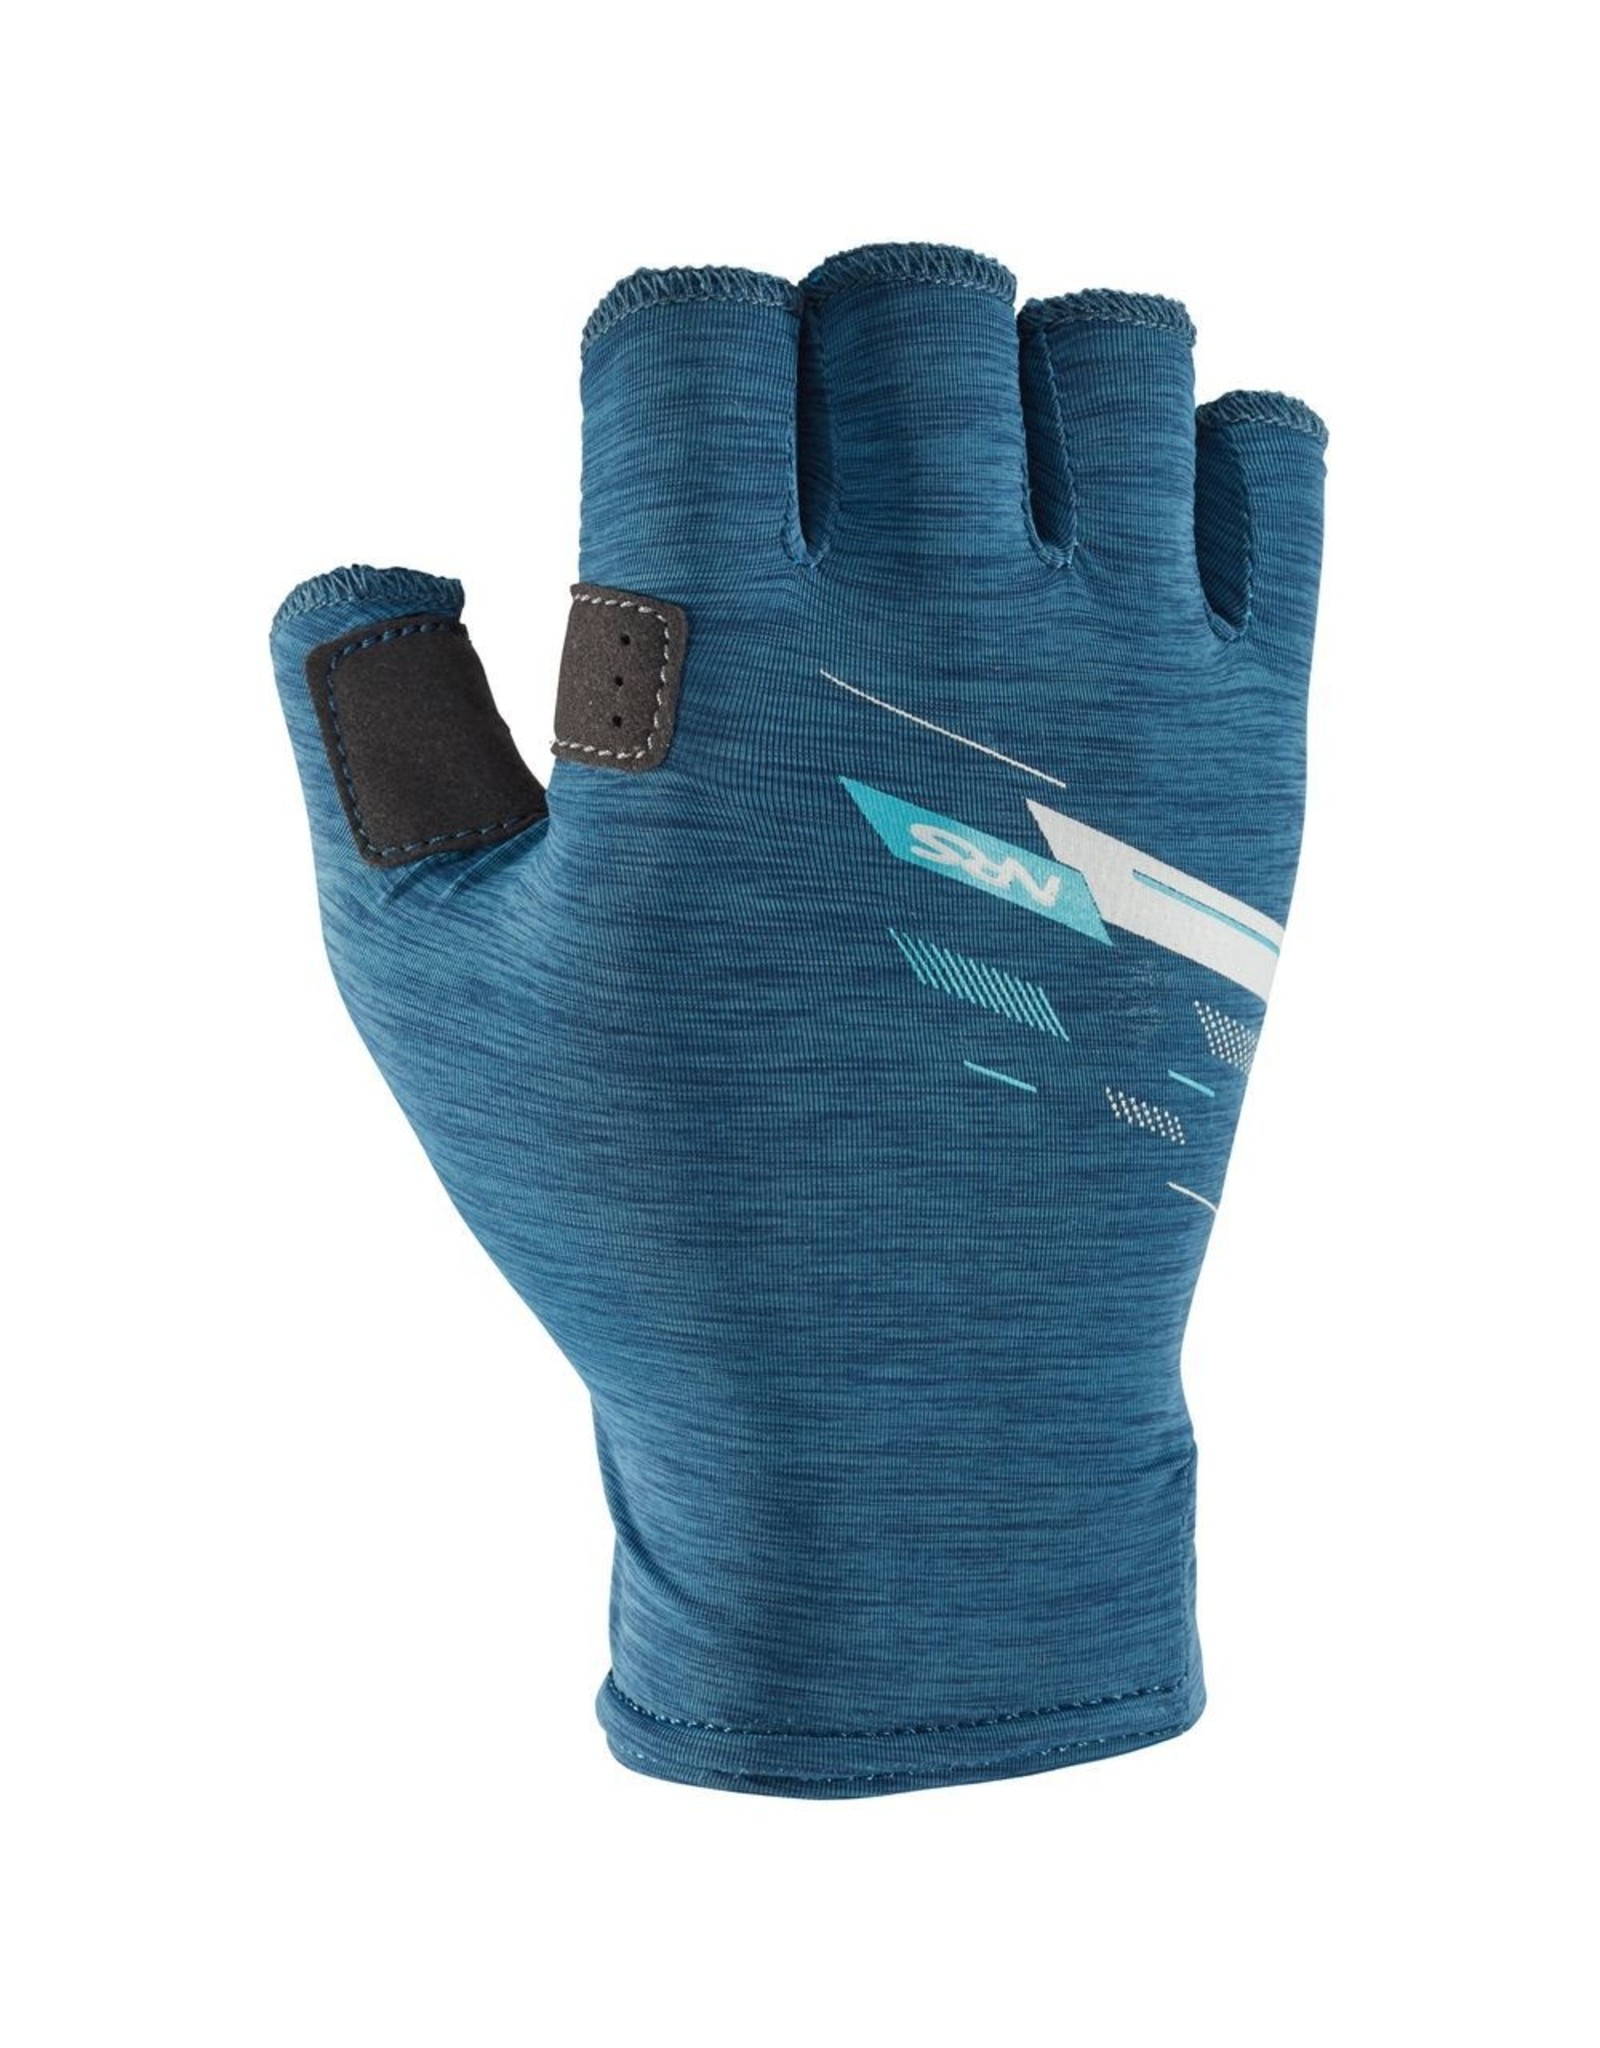 NRS NRS Boater's Glove - Closeout